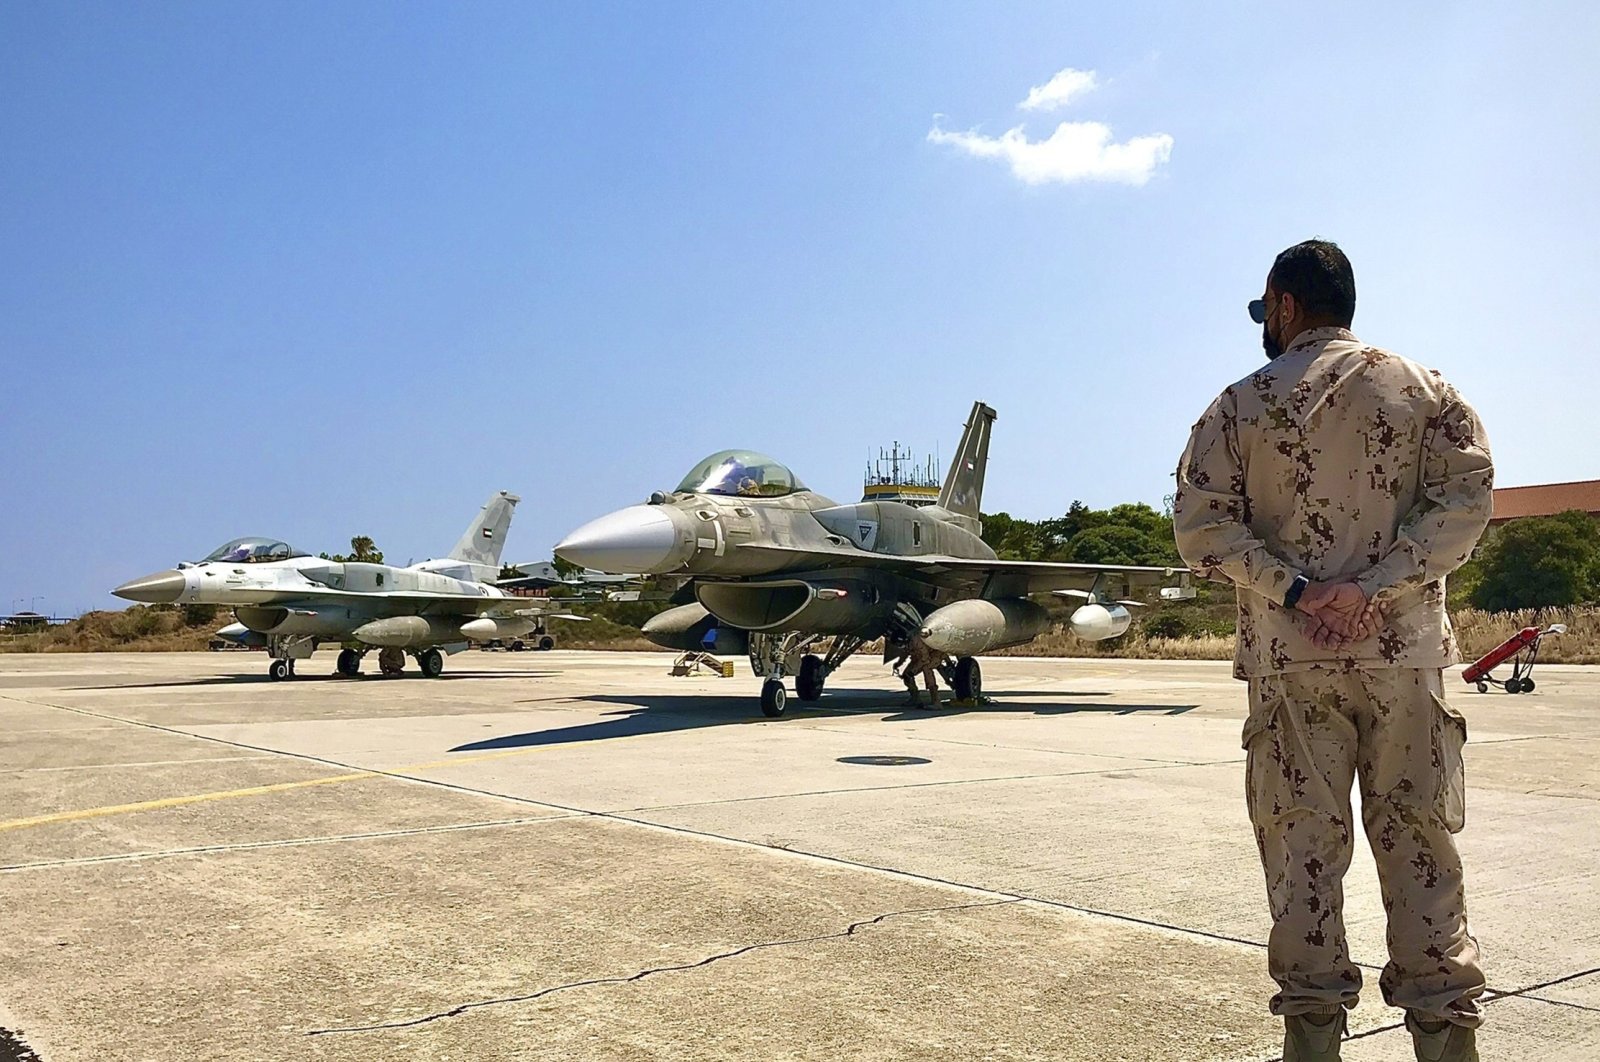 In this photo provided by the Greek Defense Ministry, air force jets from the United Arab Emirates (UAE) arrive at the Souda air base to take part in joint training with Greek forces, on the southern island of Crete, Greece, Aug. 27, 2020. (AP Photo)